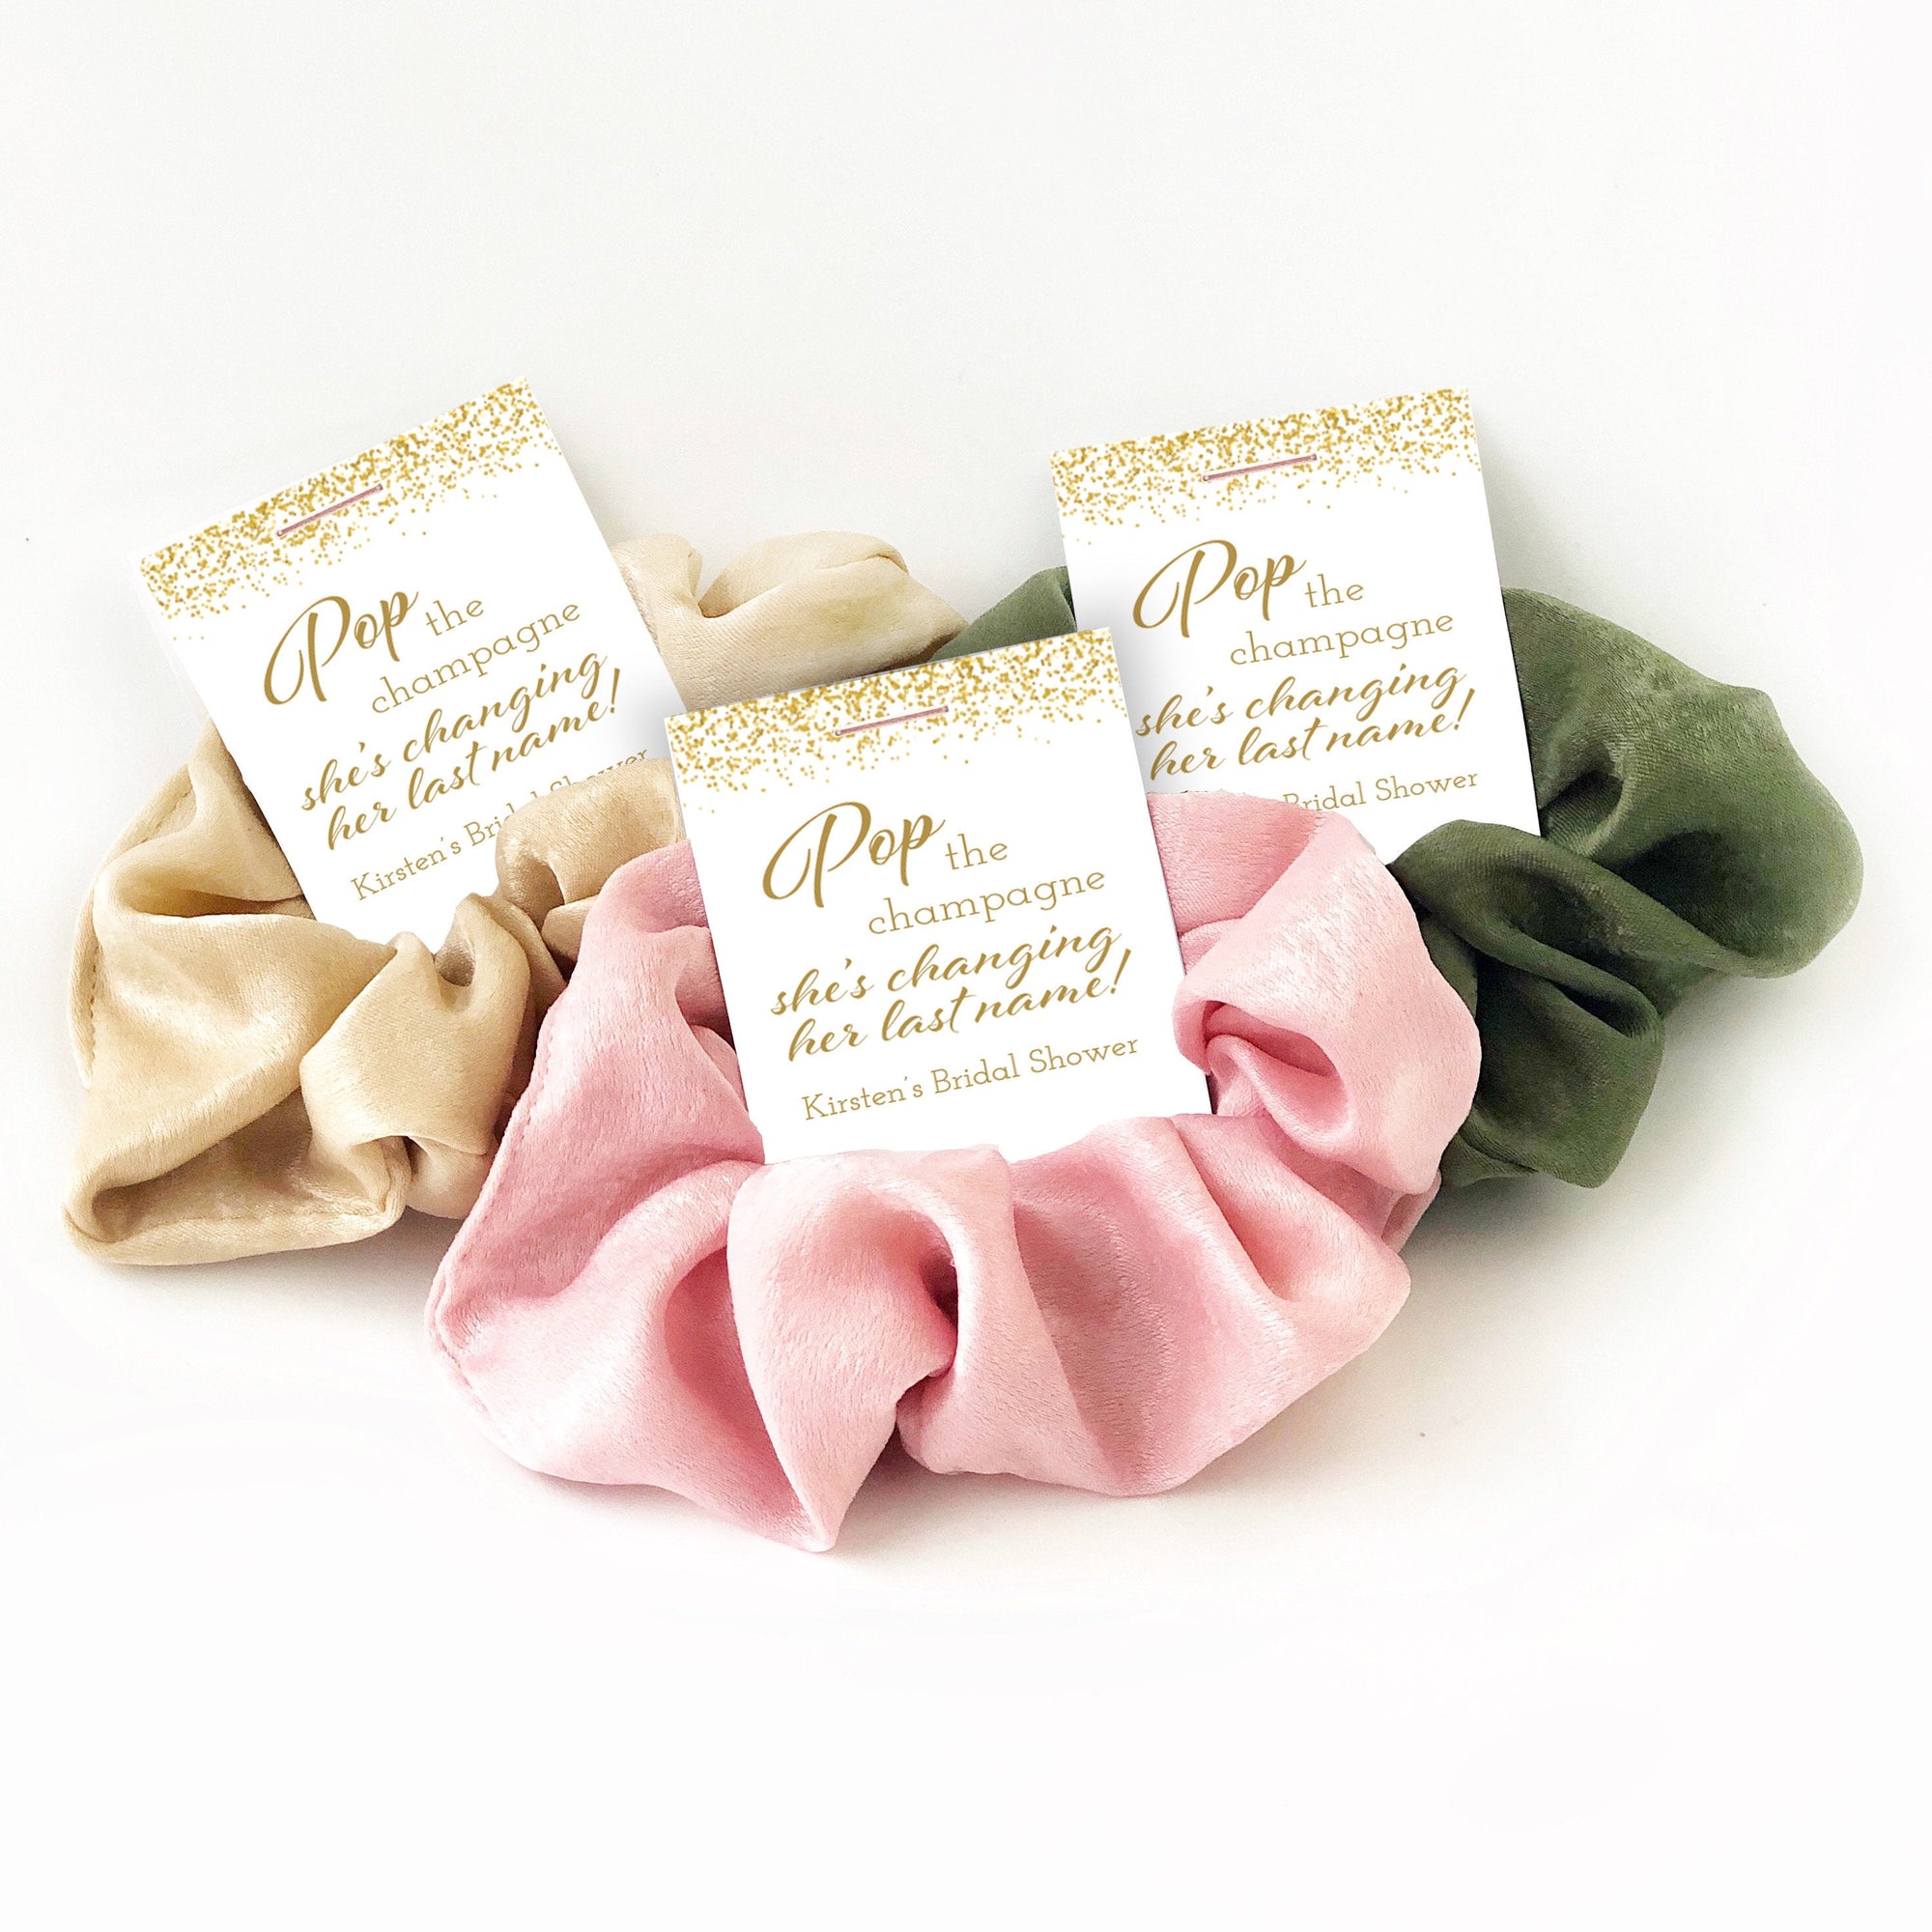 Pop The Champagne She's Changing Her Last Name Bridal Shower Favors, Hair Scrunchie Favors, Gold Bachelorette Party Favors - @PlumPolkaDot 